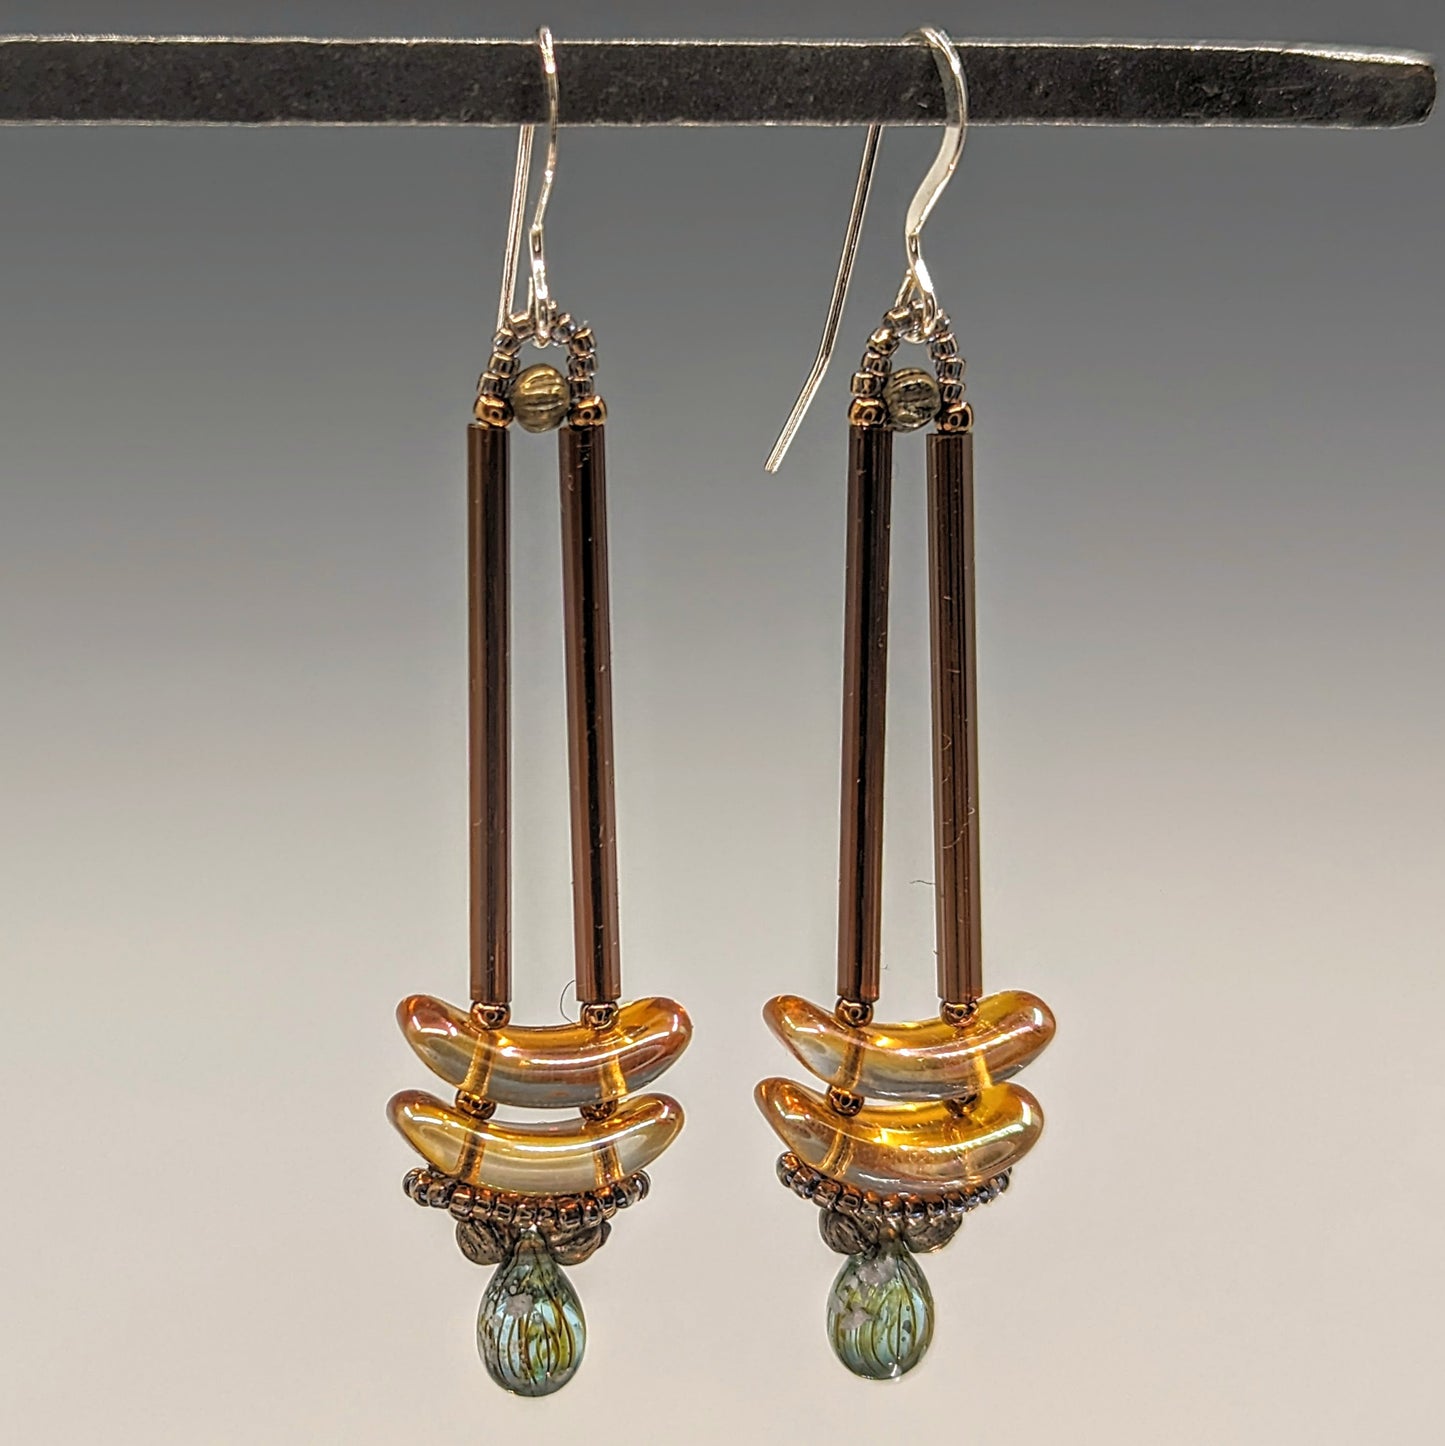 Earrings that look similar to a medicine dropper hang from  a black bar. There are two long, brown beads forming narrow vertical columns ending at the top of two transparent peach colored stacked arc shaped beads. At the bottom is a drop shaped bead made from aqua colored glass with black stripes inside of it, surrounded by a belt of gold seed beads.